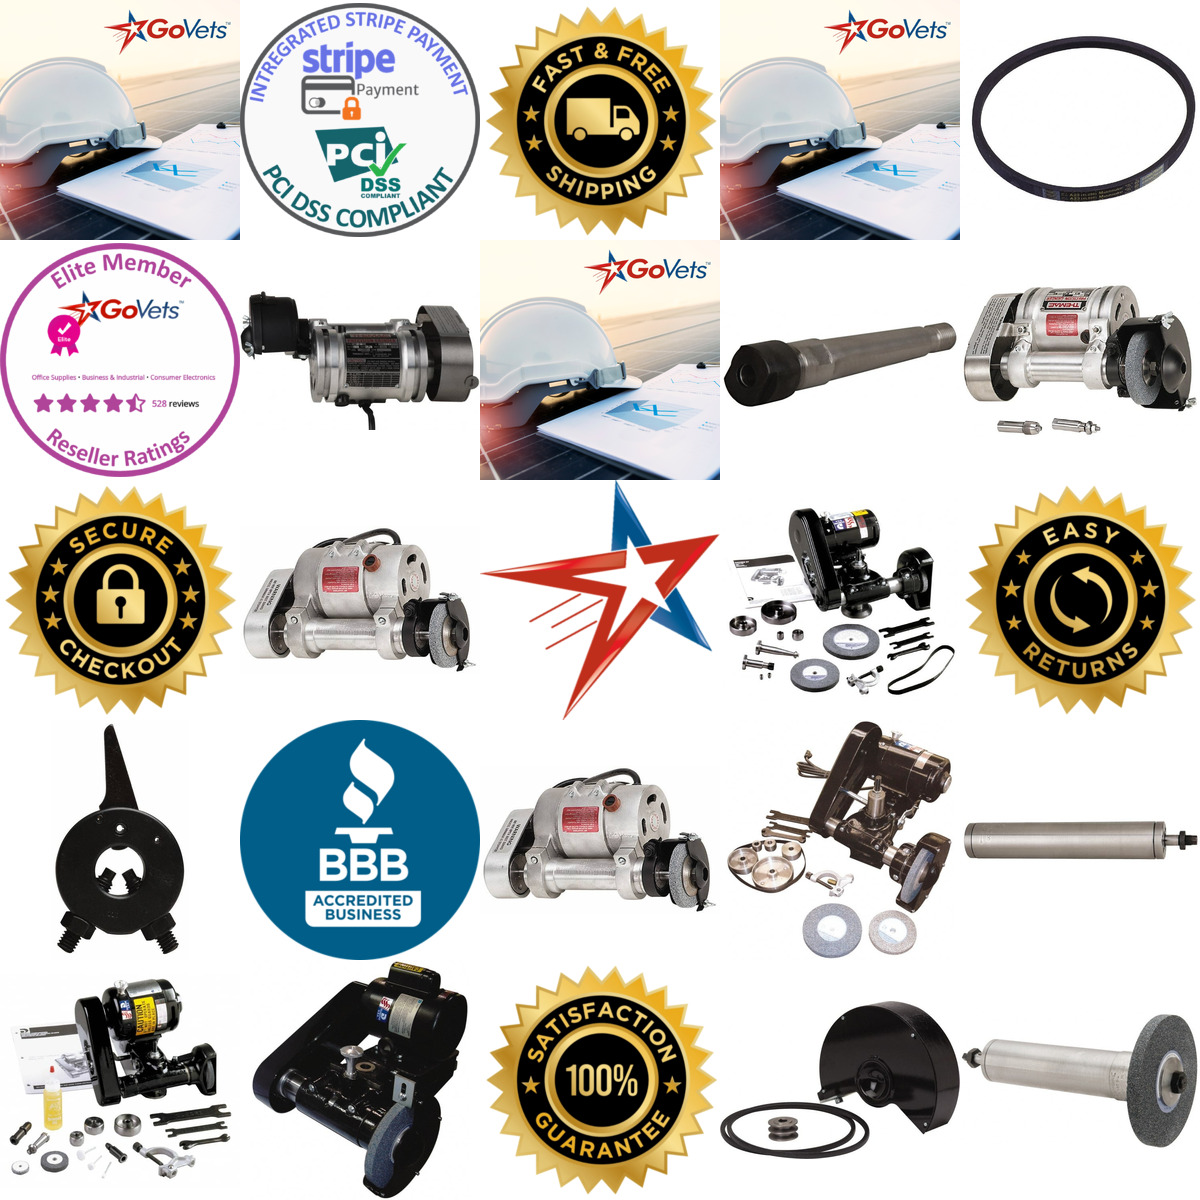 A selection of Tool Post Grinders and Accessories products on GoVets